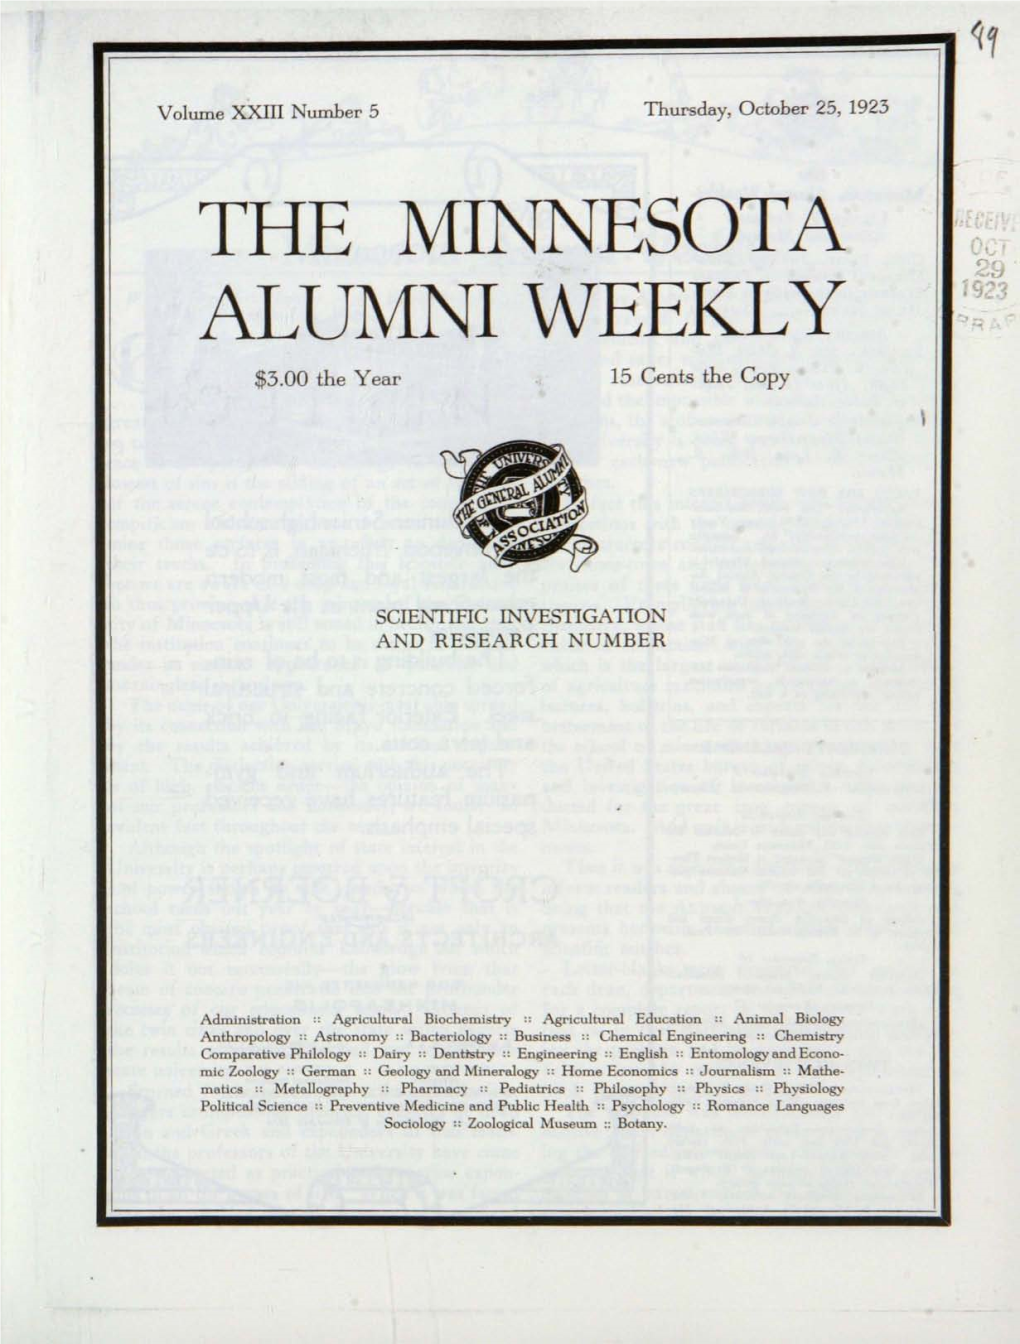 THE MINNESOTA ALUMNI WEEKLY $3.00 the Year 15 Cents the Copy